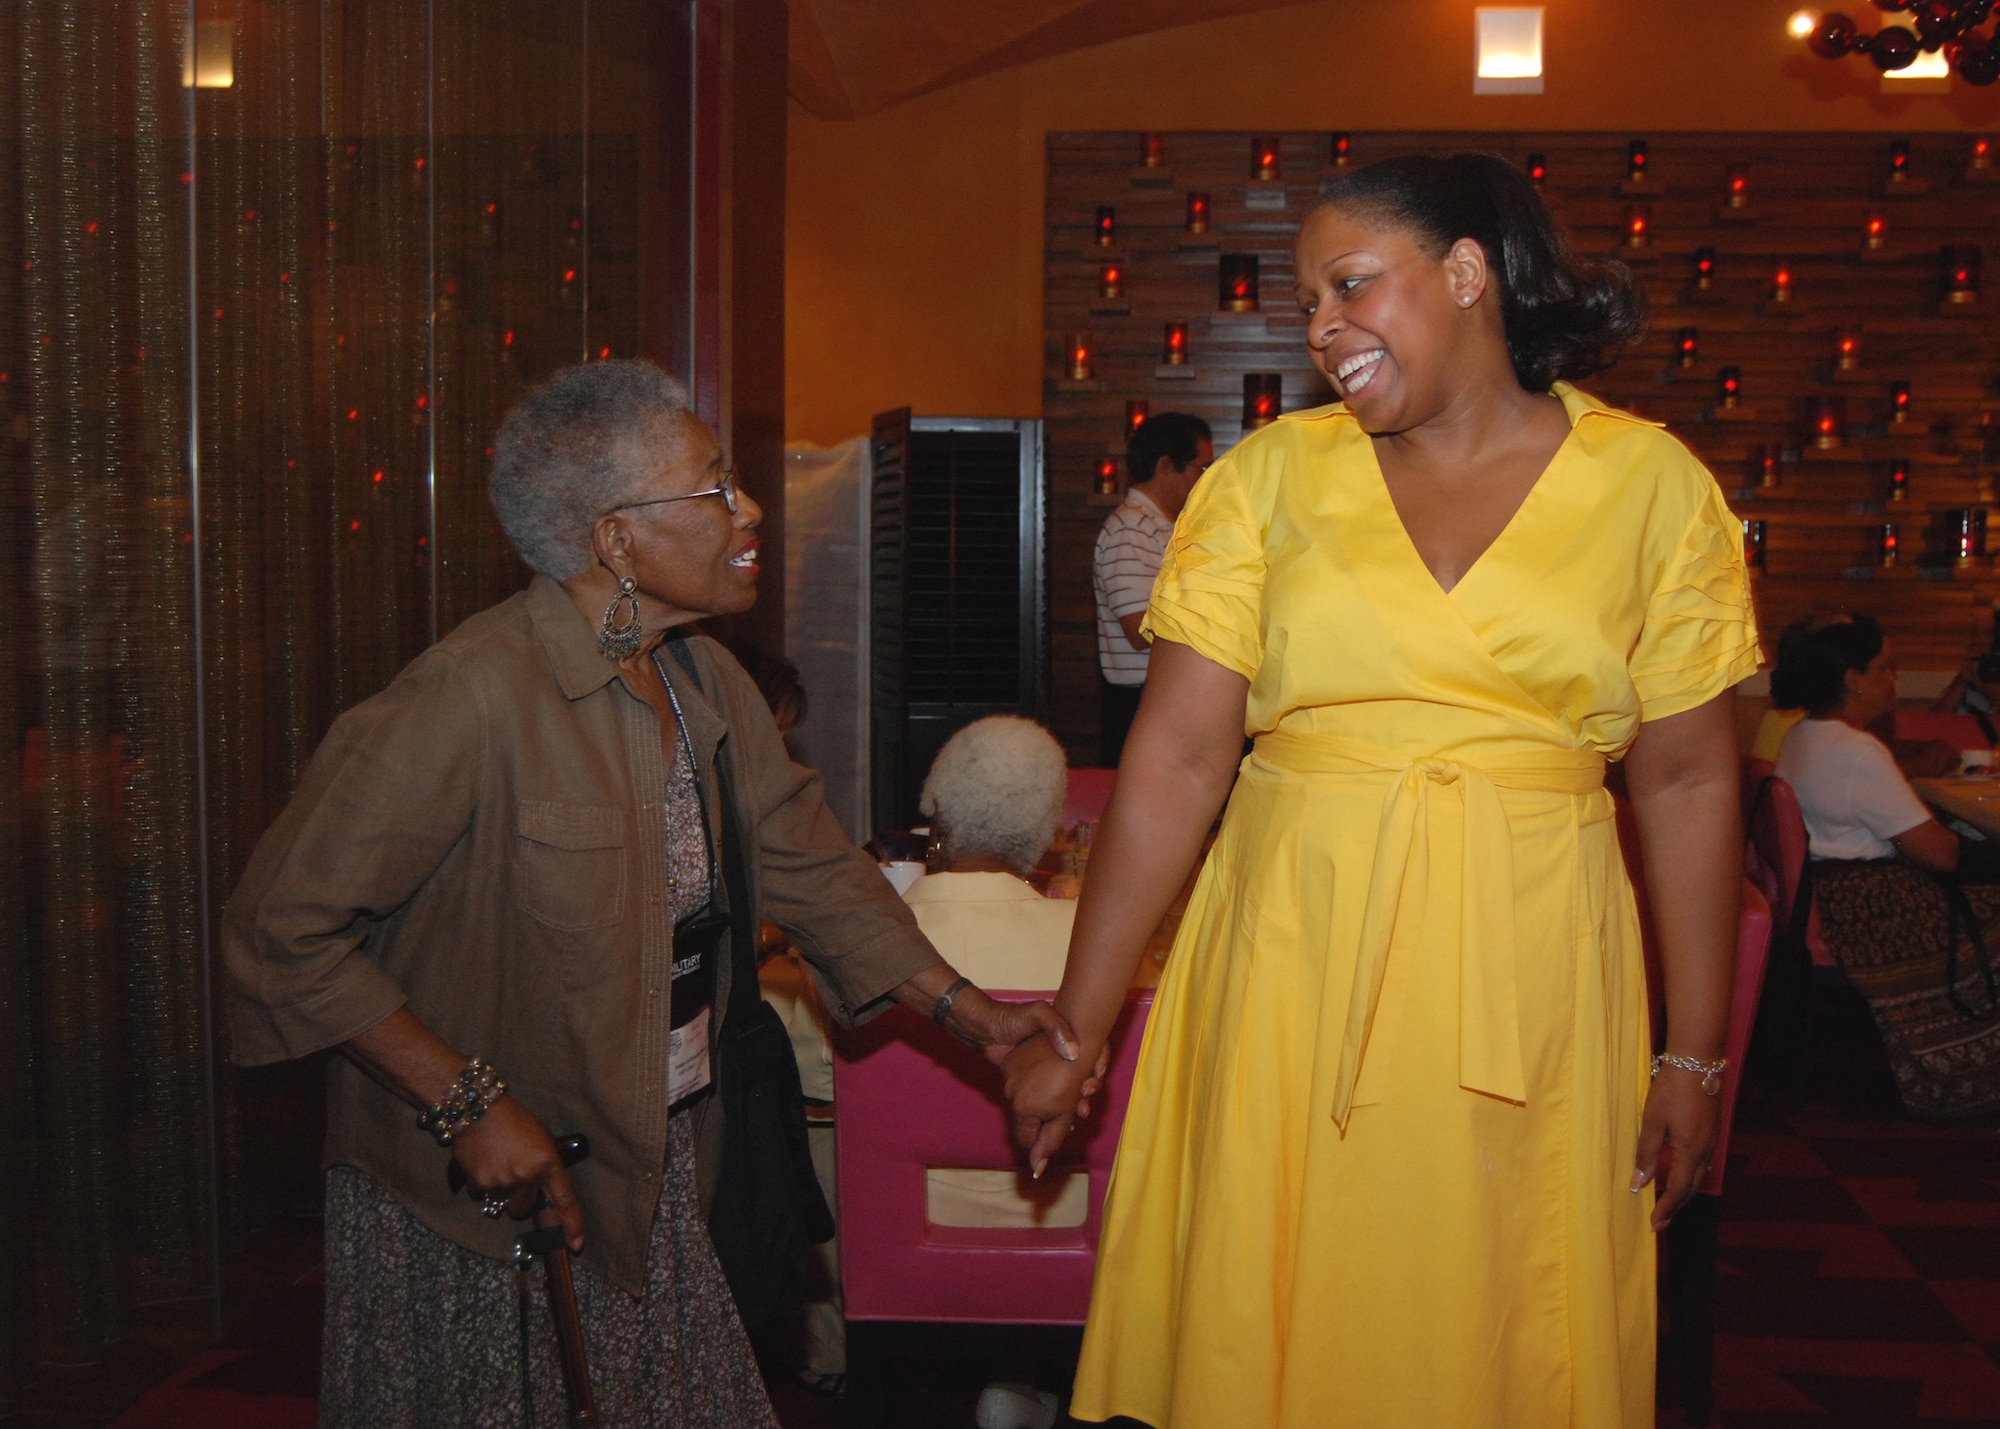 Jennifer Myers (right), national historian of the Tuskegee Airmen Incorporated, welcomes Dr. Nancy Leftenant-Colon, former president of the TAI,  during the Spouse's Tea in San Antonio, Texas, Jul 30.  The Spouse's Tea was one of many events held in conjunction with the 39th annual TAI national convention. (U.S. Air Force photo/Tech Sgt. Steve Lewis)